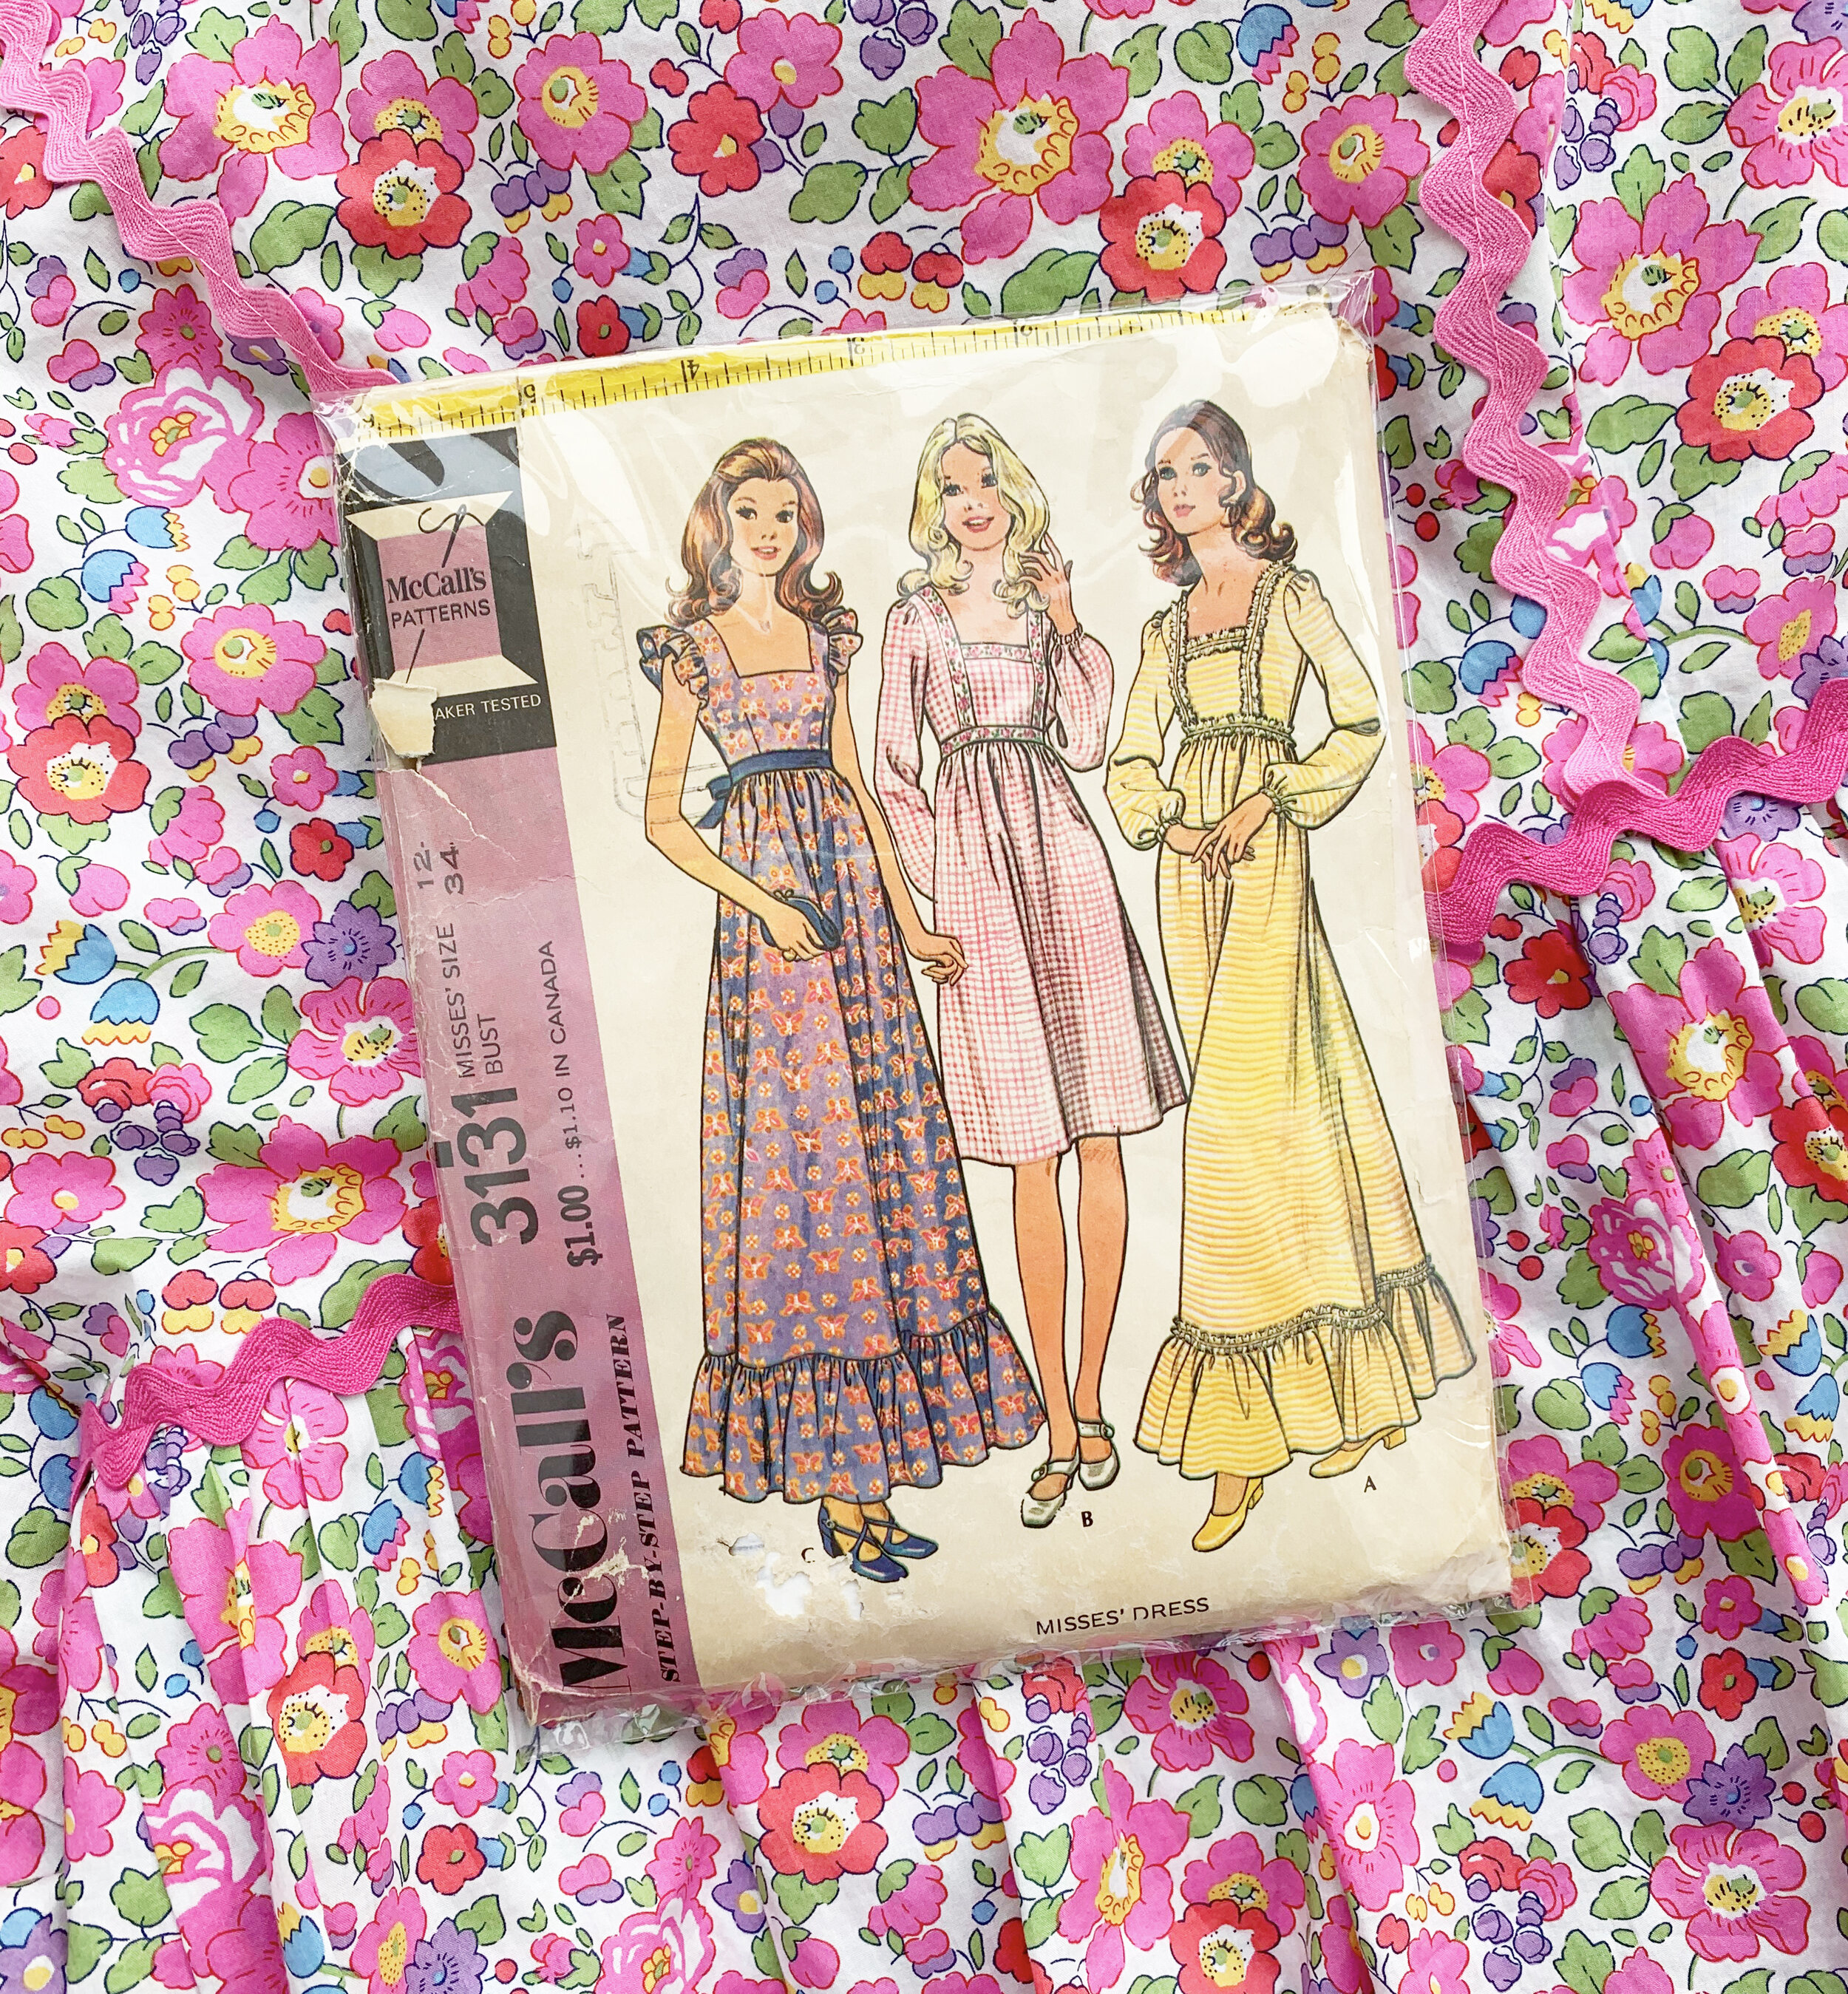 Creative Projects with Rickrack - Sew Vintagely